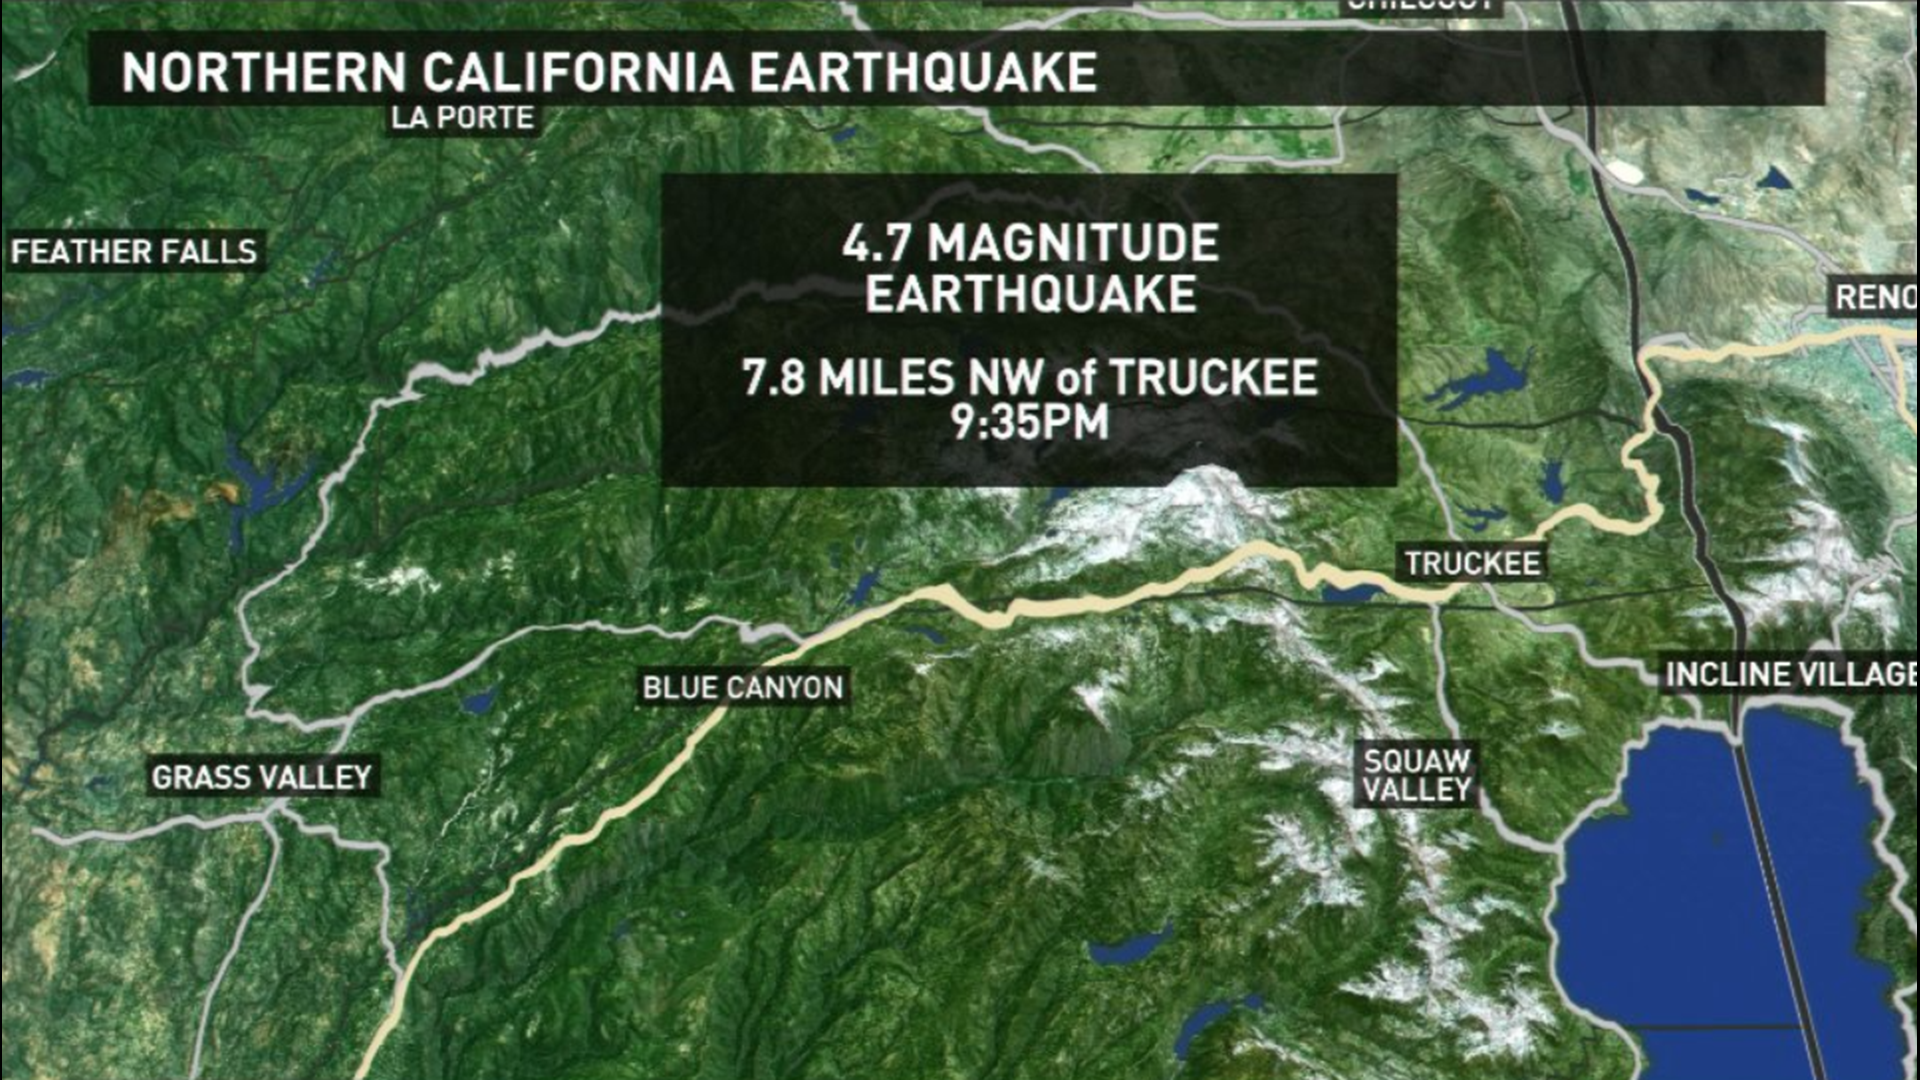 According to the U.S. Geological Survey (USGS), the epicenter of the earthquake was about 8 miles northwest of Truckee.